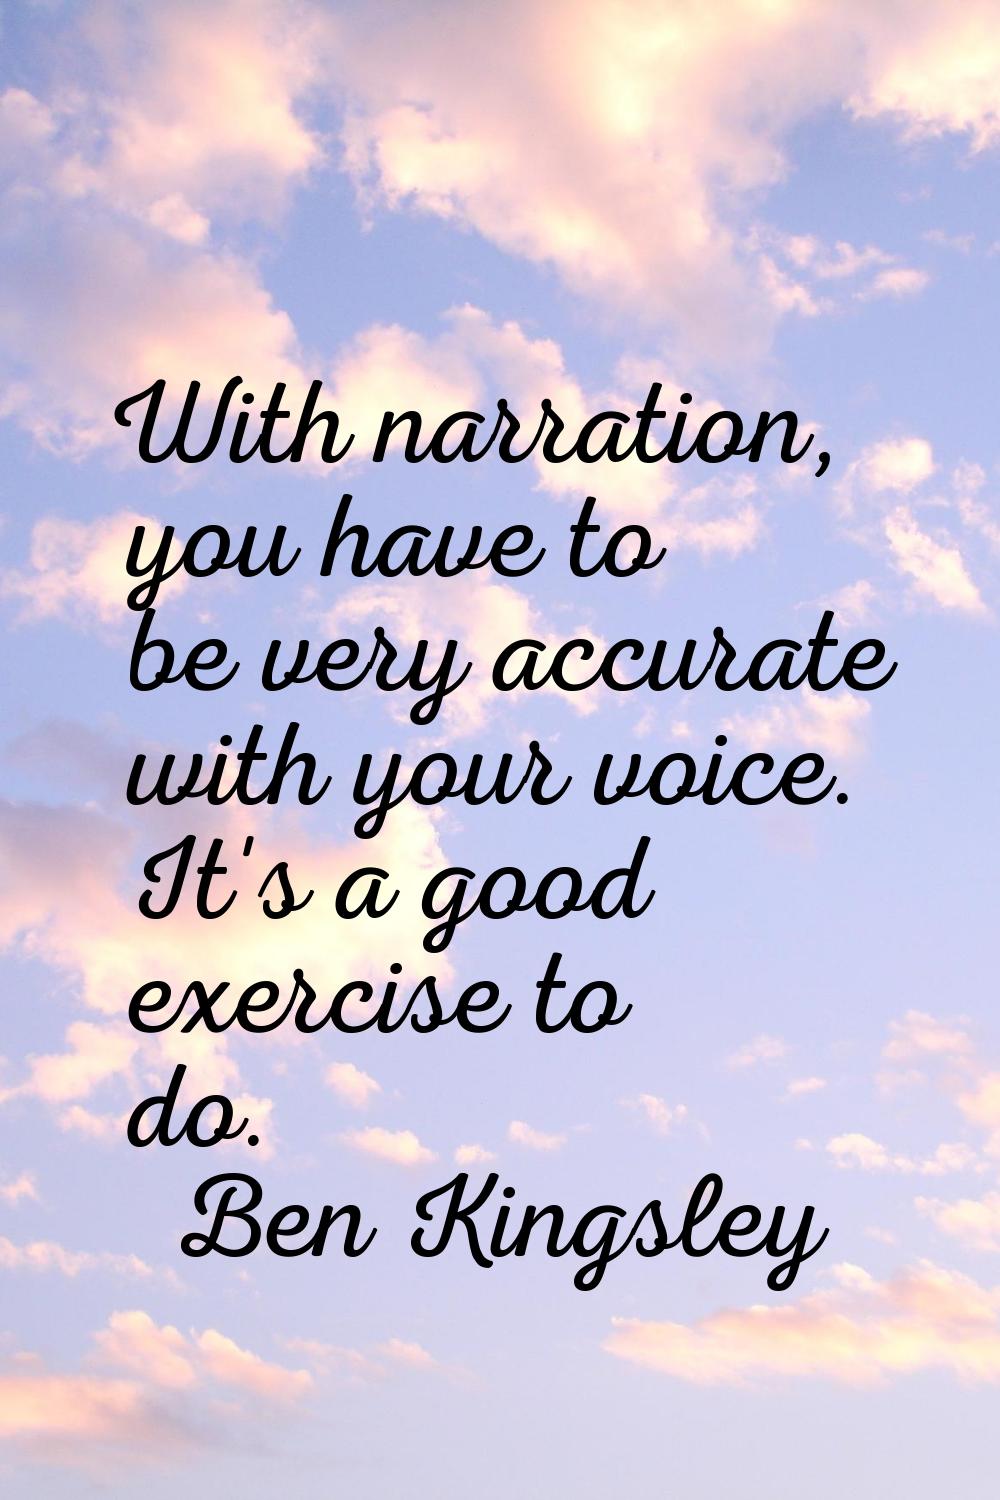 With narration, you have to be very accurate with your voice. It's a good exercise to do.